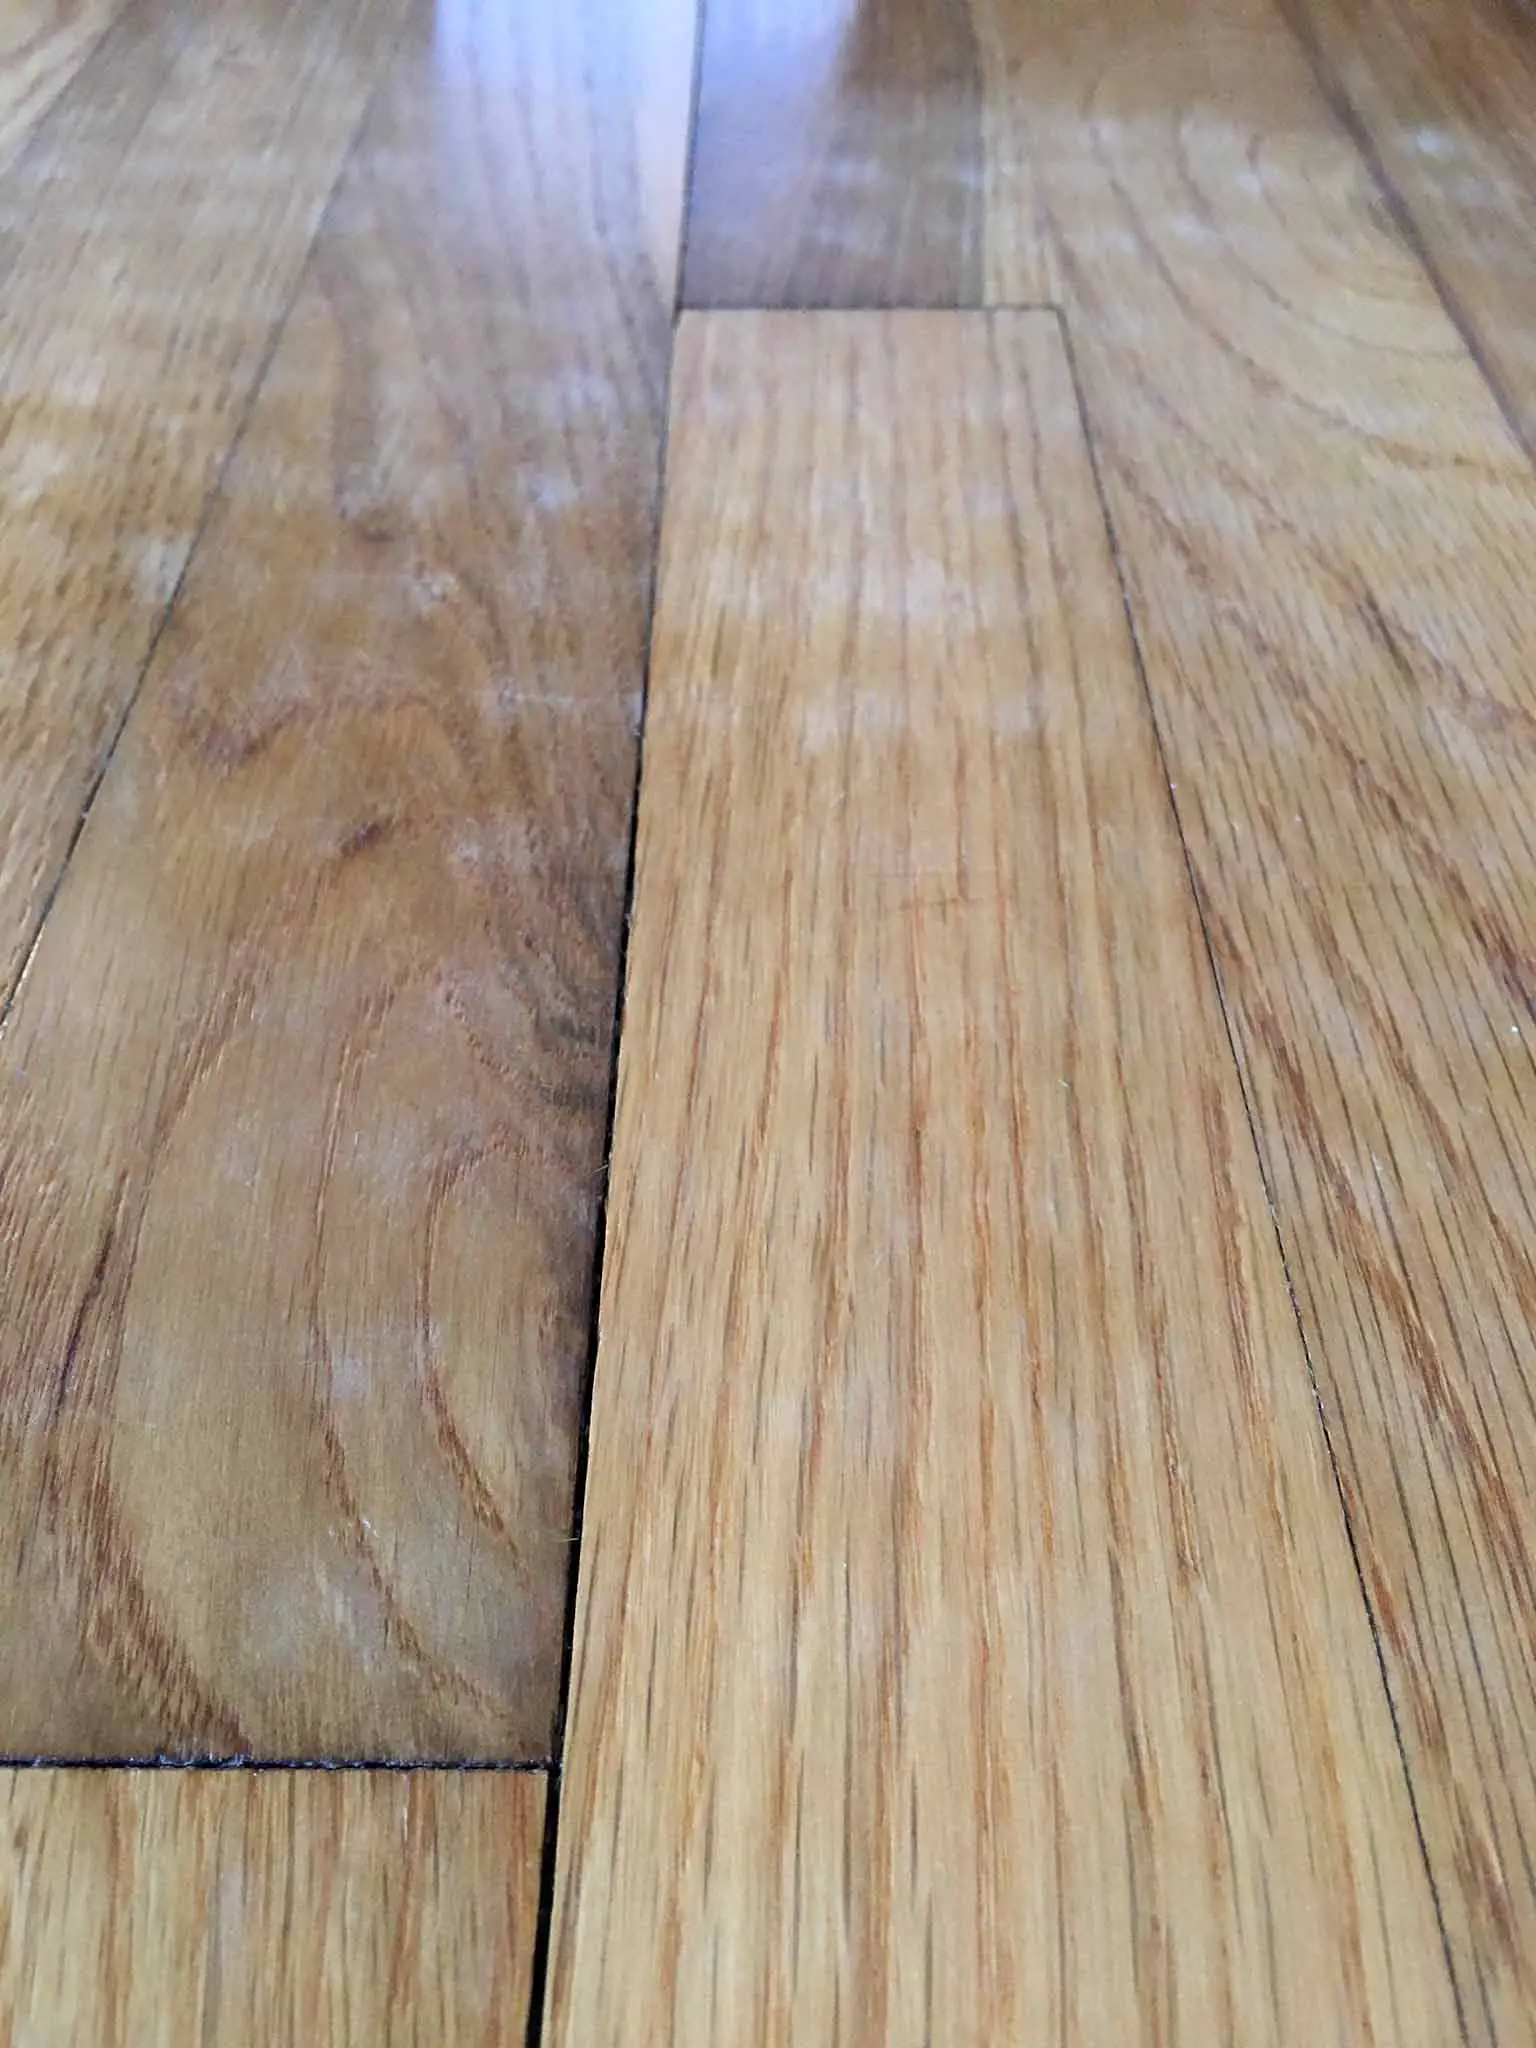 How I Wrecked My Hardwood Floors And, How To Protect Newly Finished Hardwood Floors During Construction